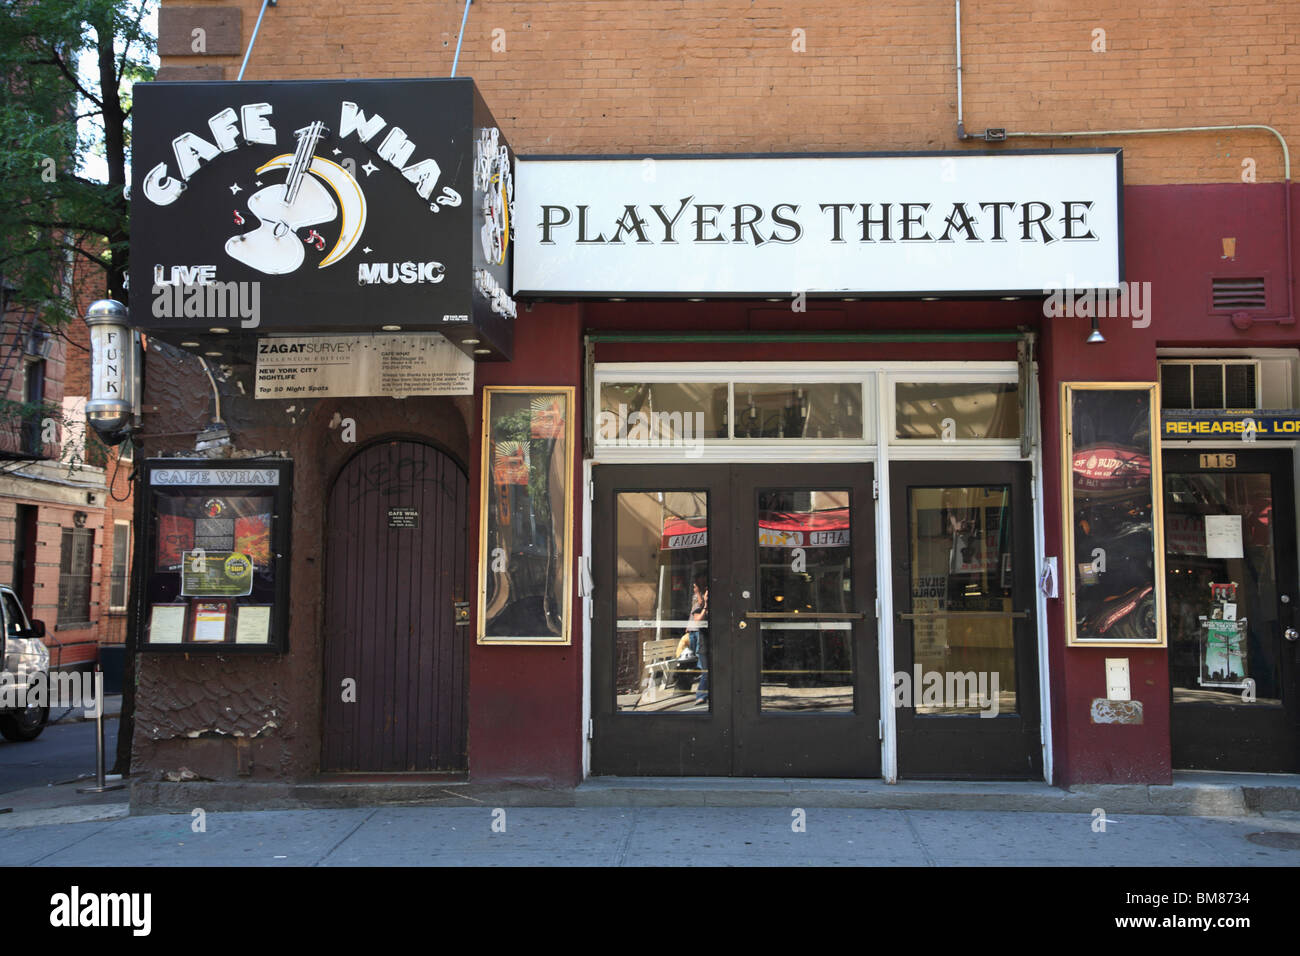 Cafe Wha, Players Theatre, Greenwich Village, C, Manhattan, New York City, USA Banque D'Images